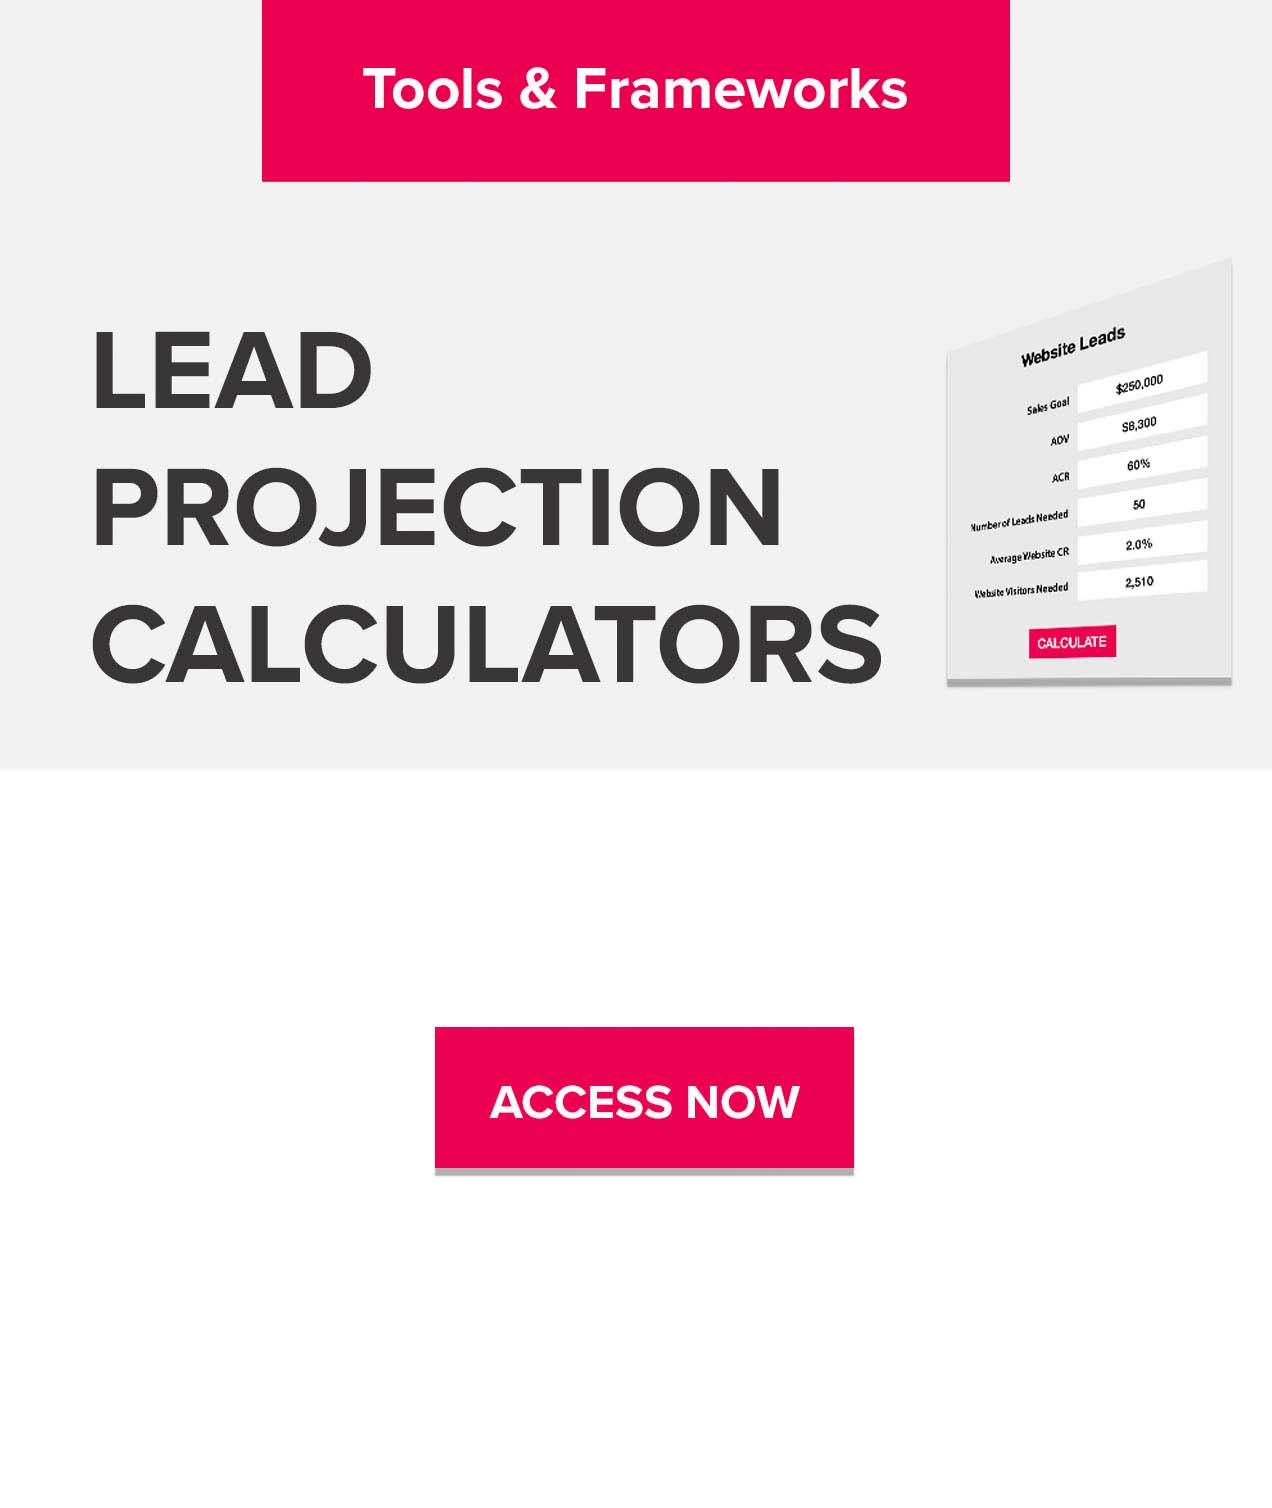 Lead Generation Calculators for Sales and Marketing